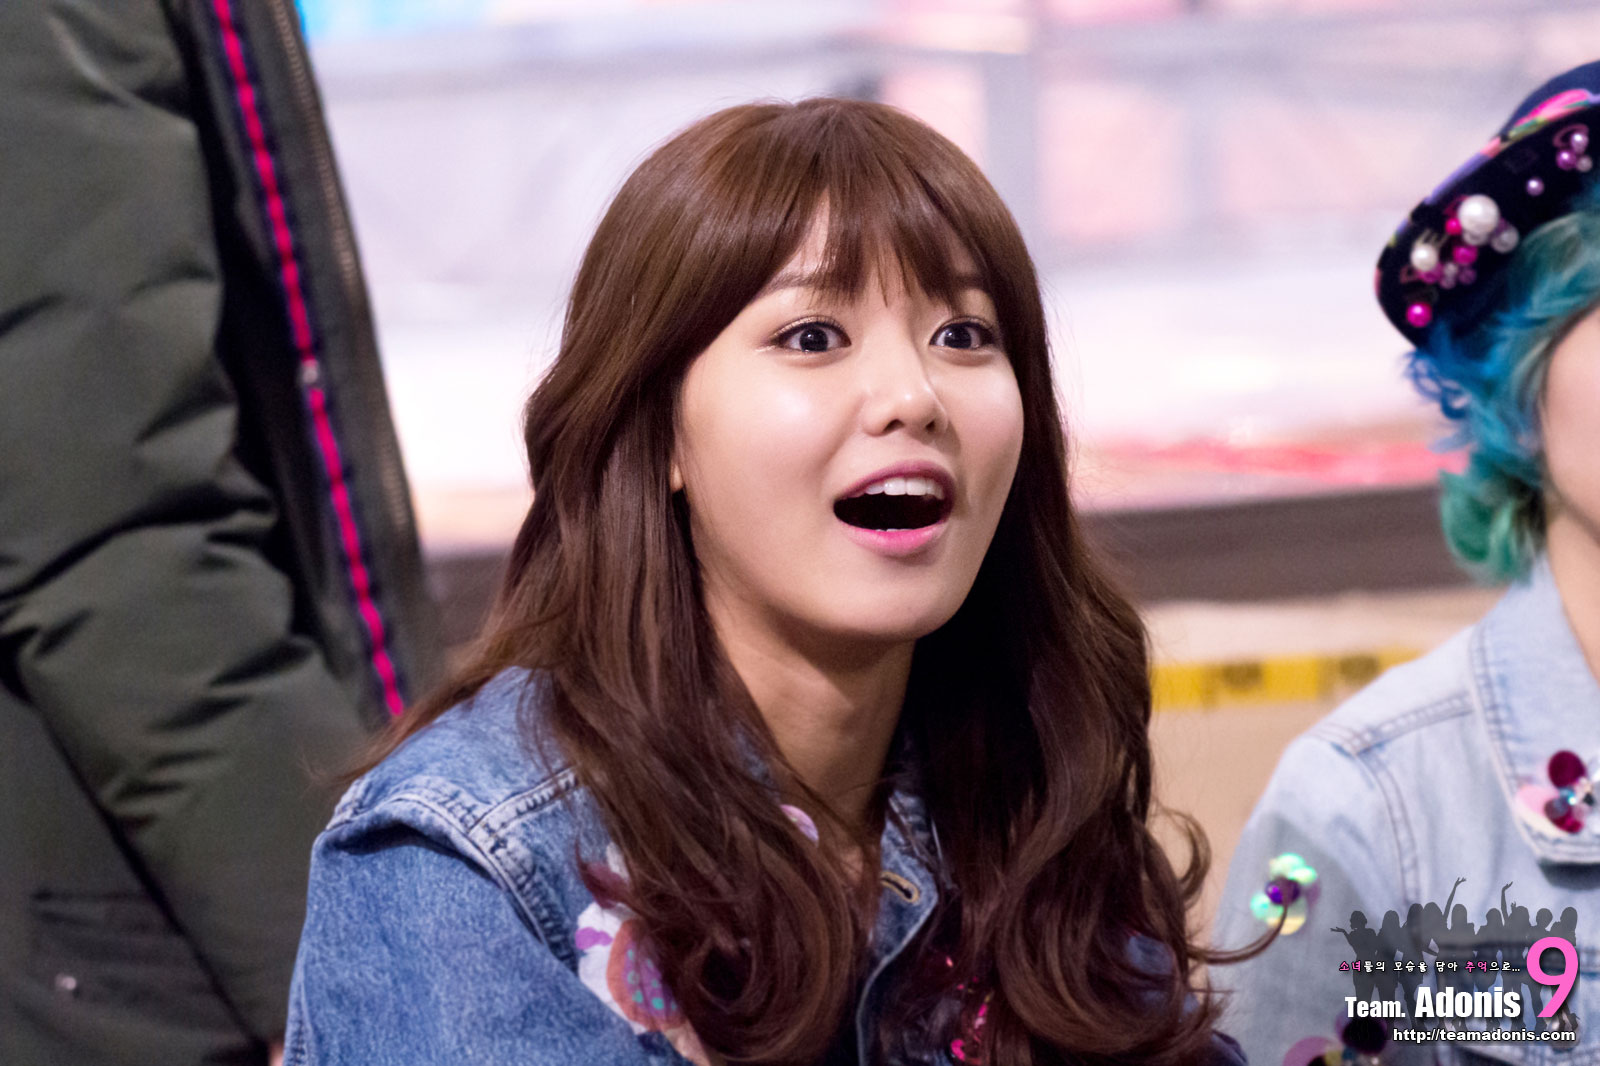 Sooyoung @ IGAB fan signing event